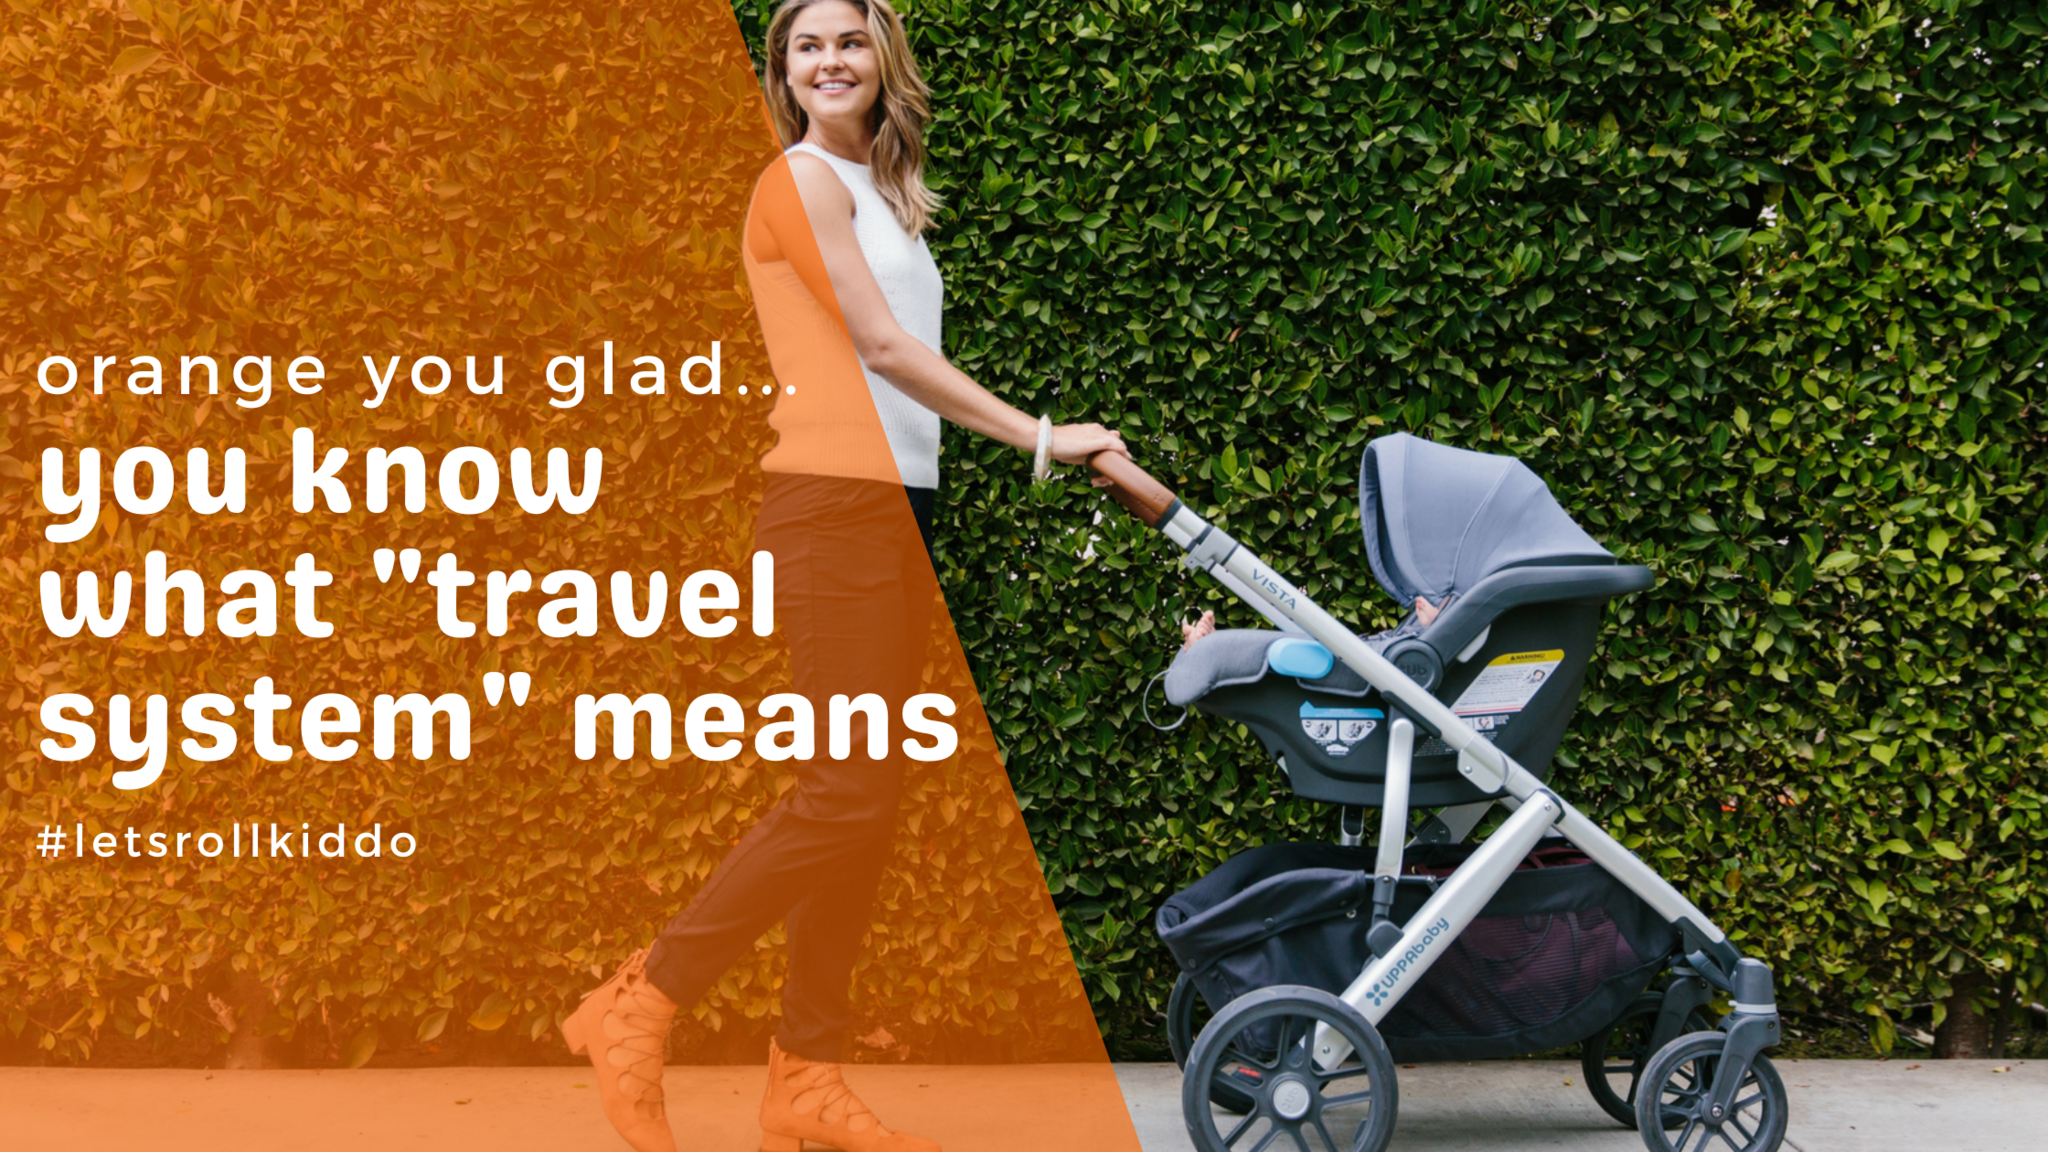 you know what "travel system" means